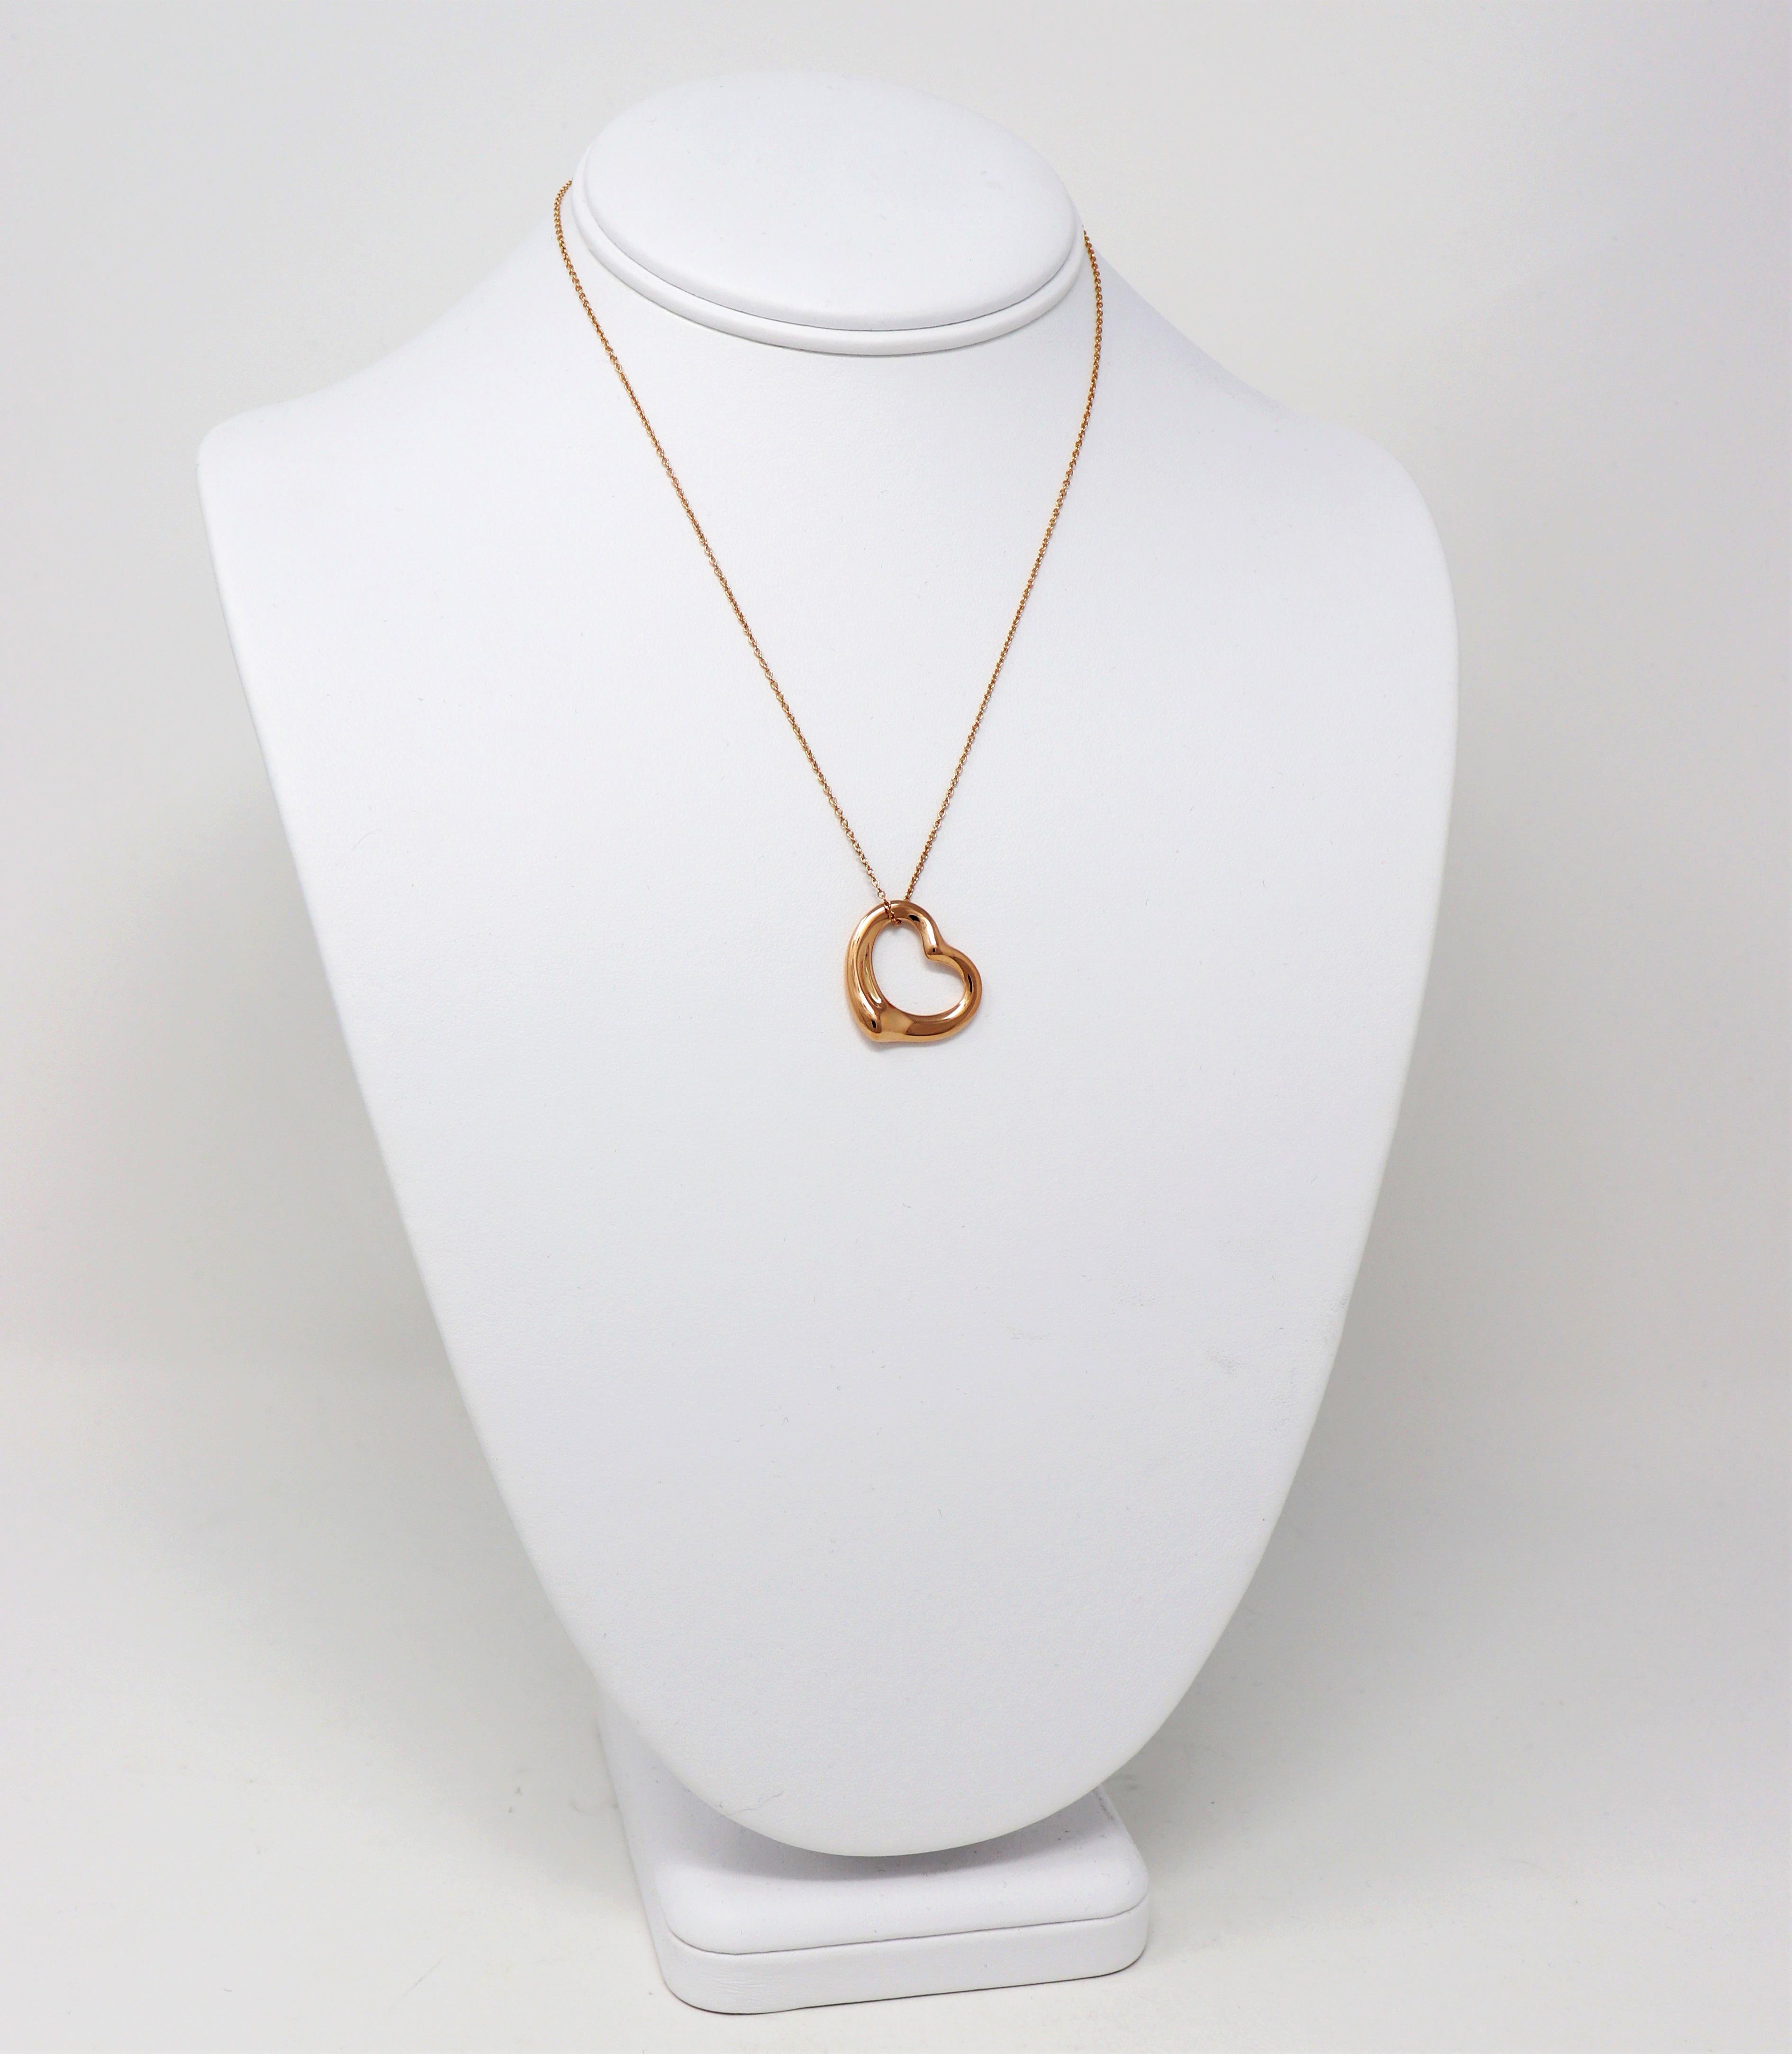 Gorgeous open heart pendant necklace by Elsa Peretti for Tiffany & Co. exudes minimalist elegance. The timeless design combined with the warm rose gold setting makes for a piece that you will admire for years to come. 

This beautiful designer